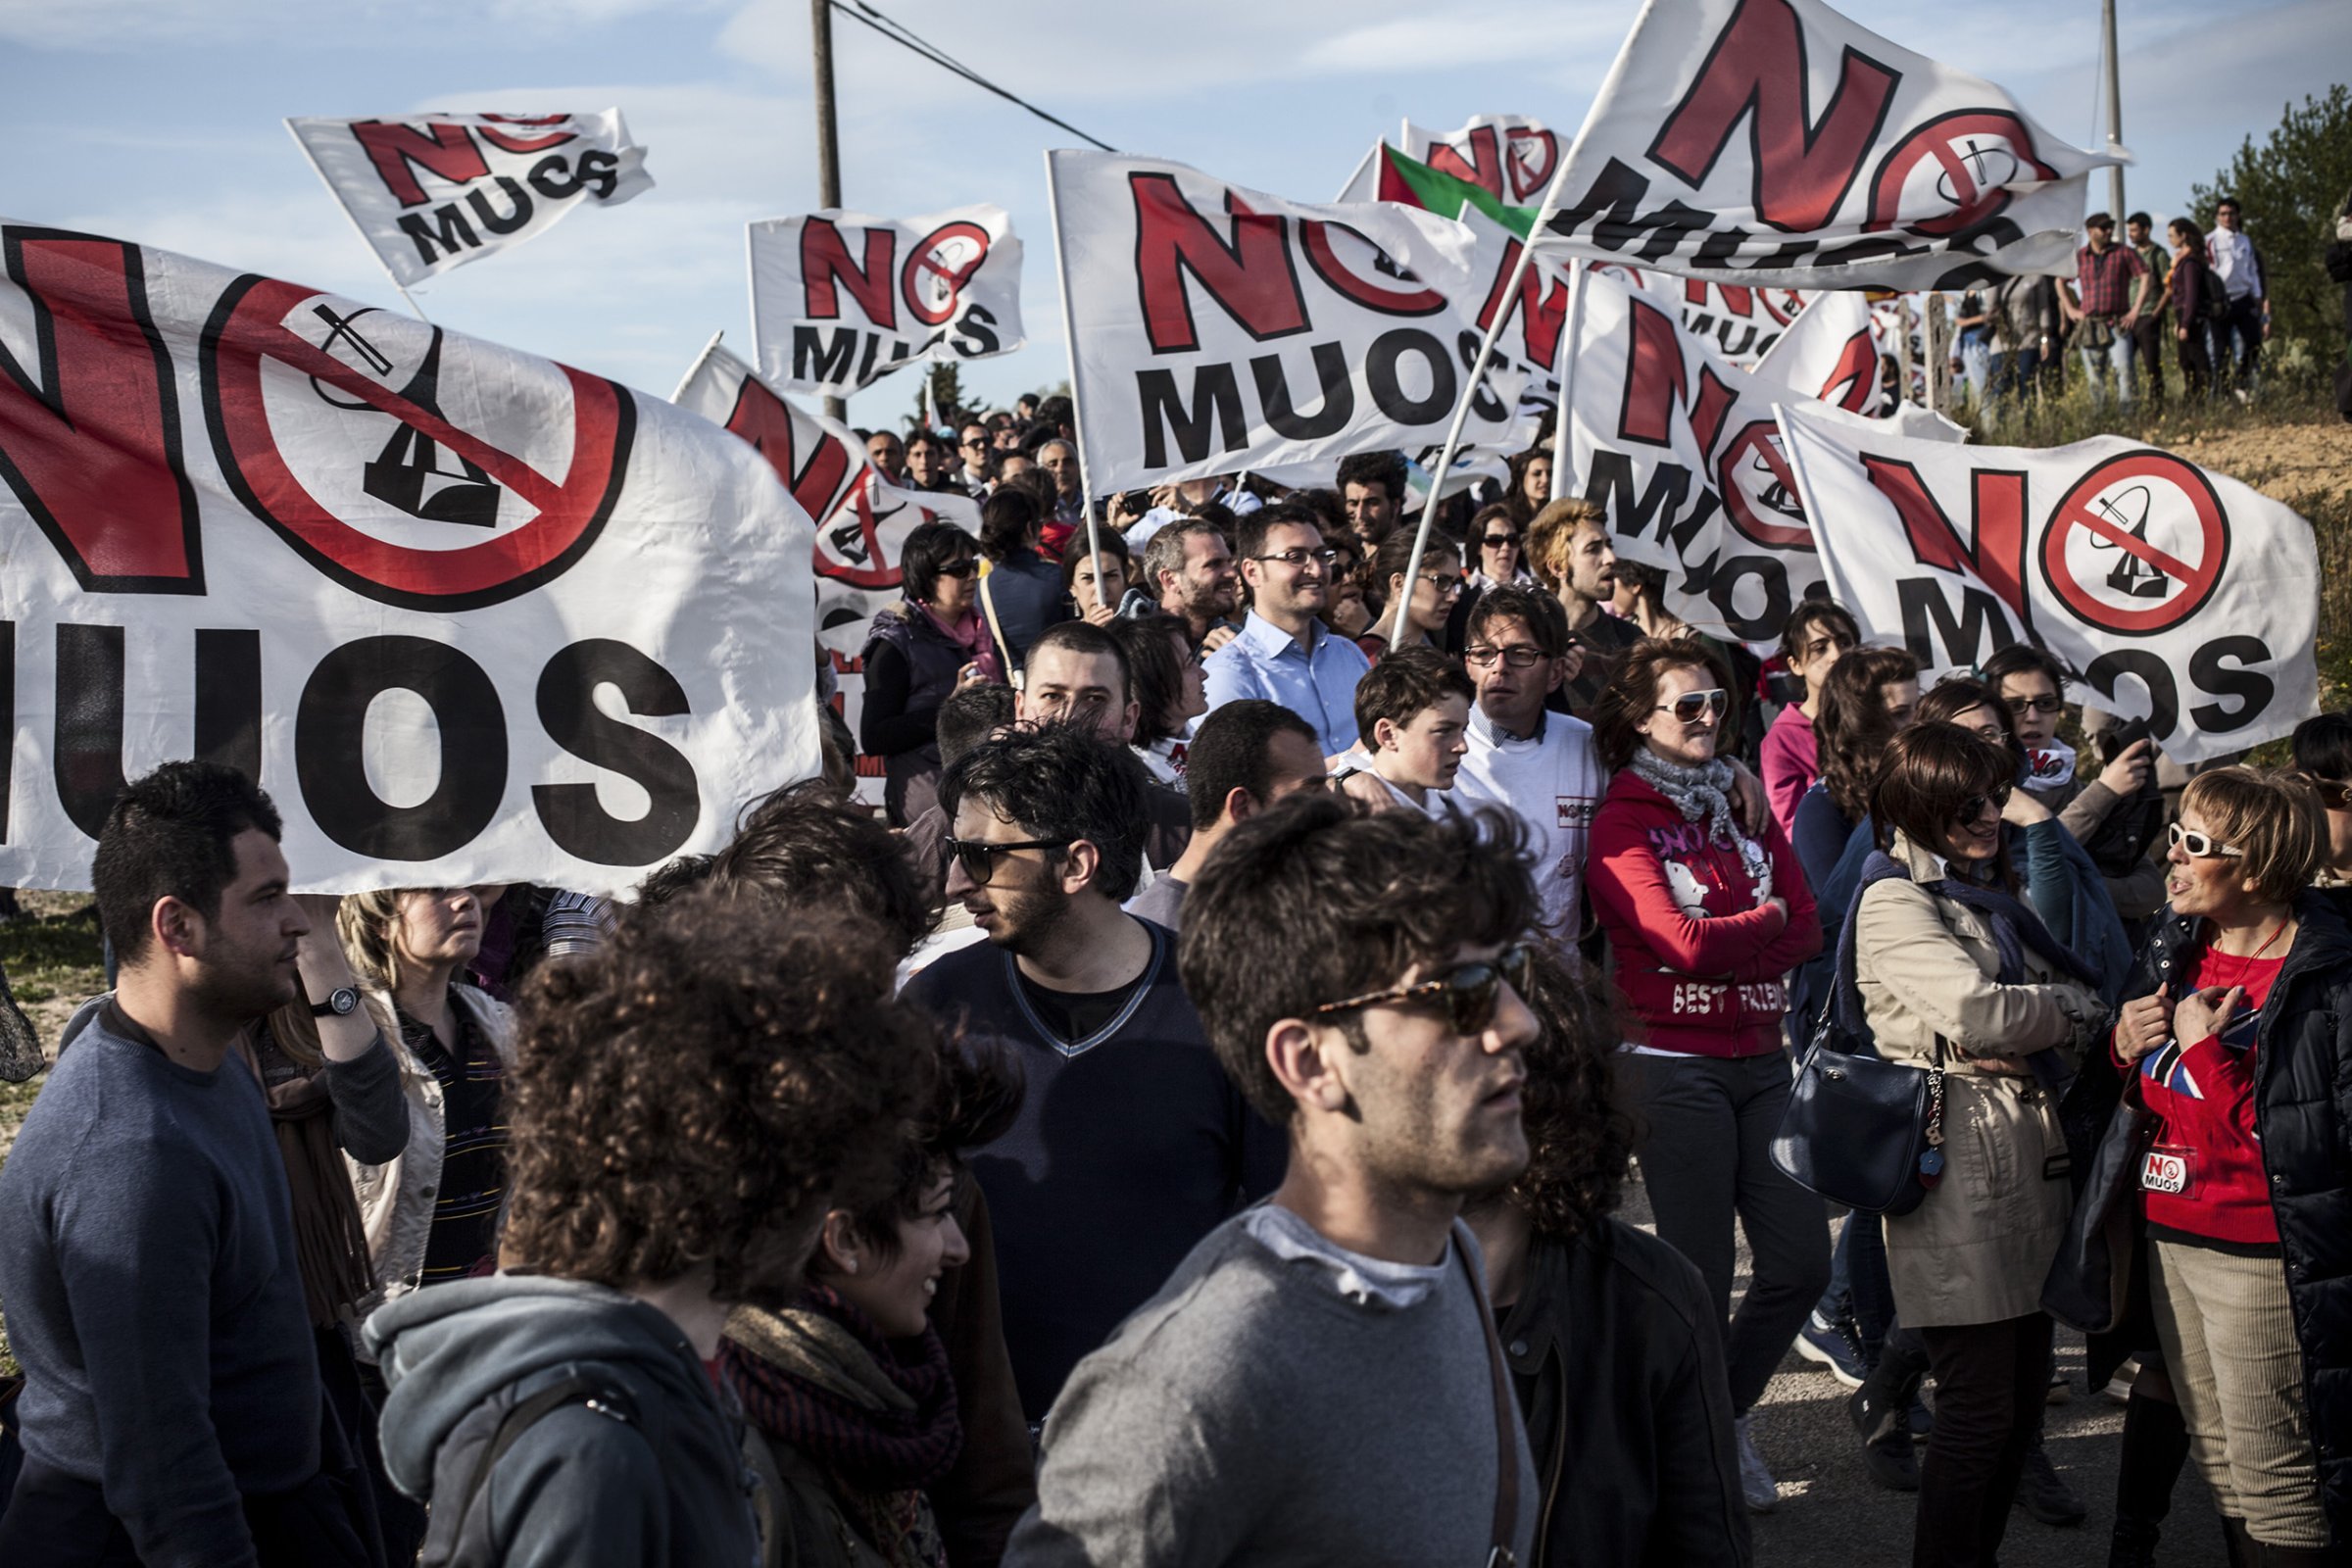 A "No MUOS" demonstration outside the American military base NRTF-8 in Nisceni, Italy, March 30, 2013.